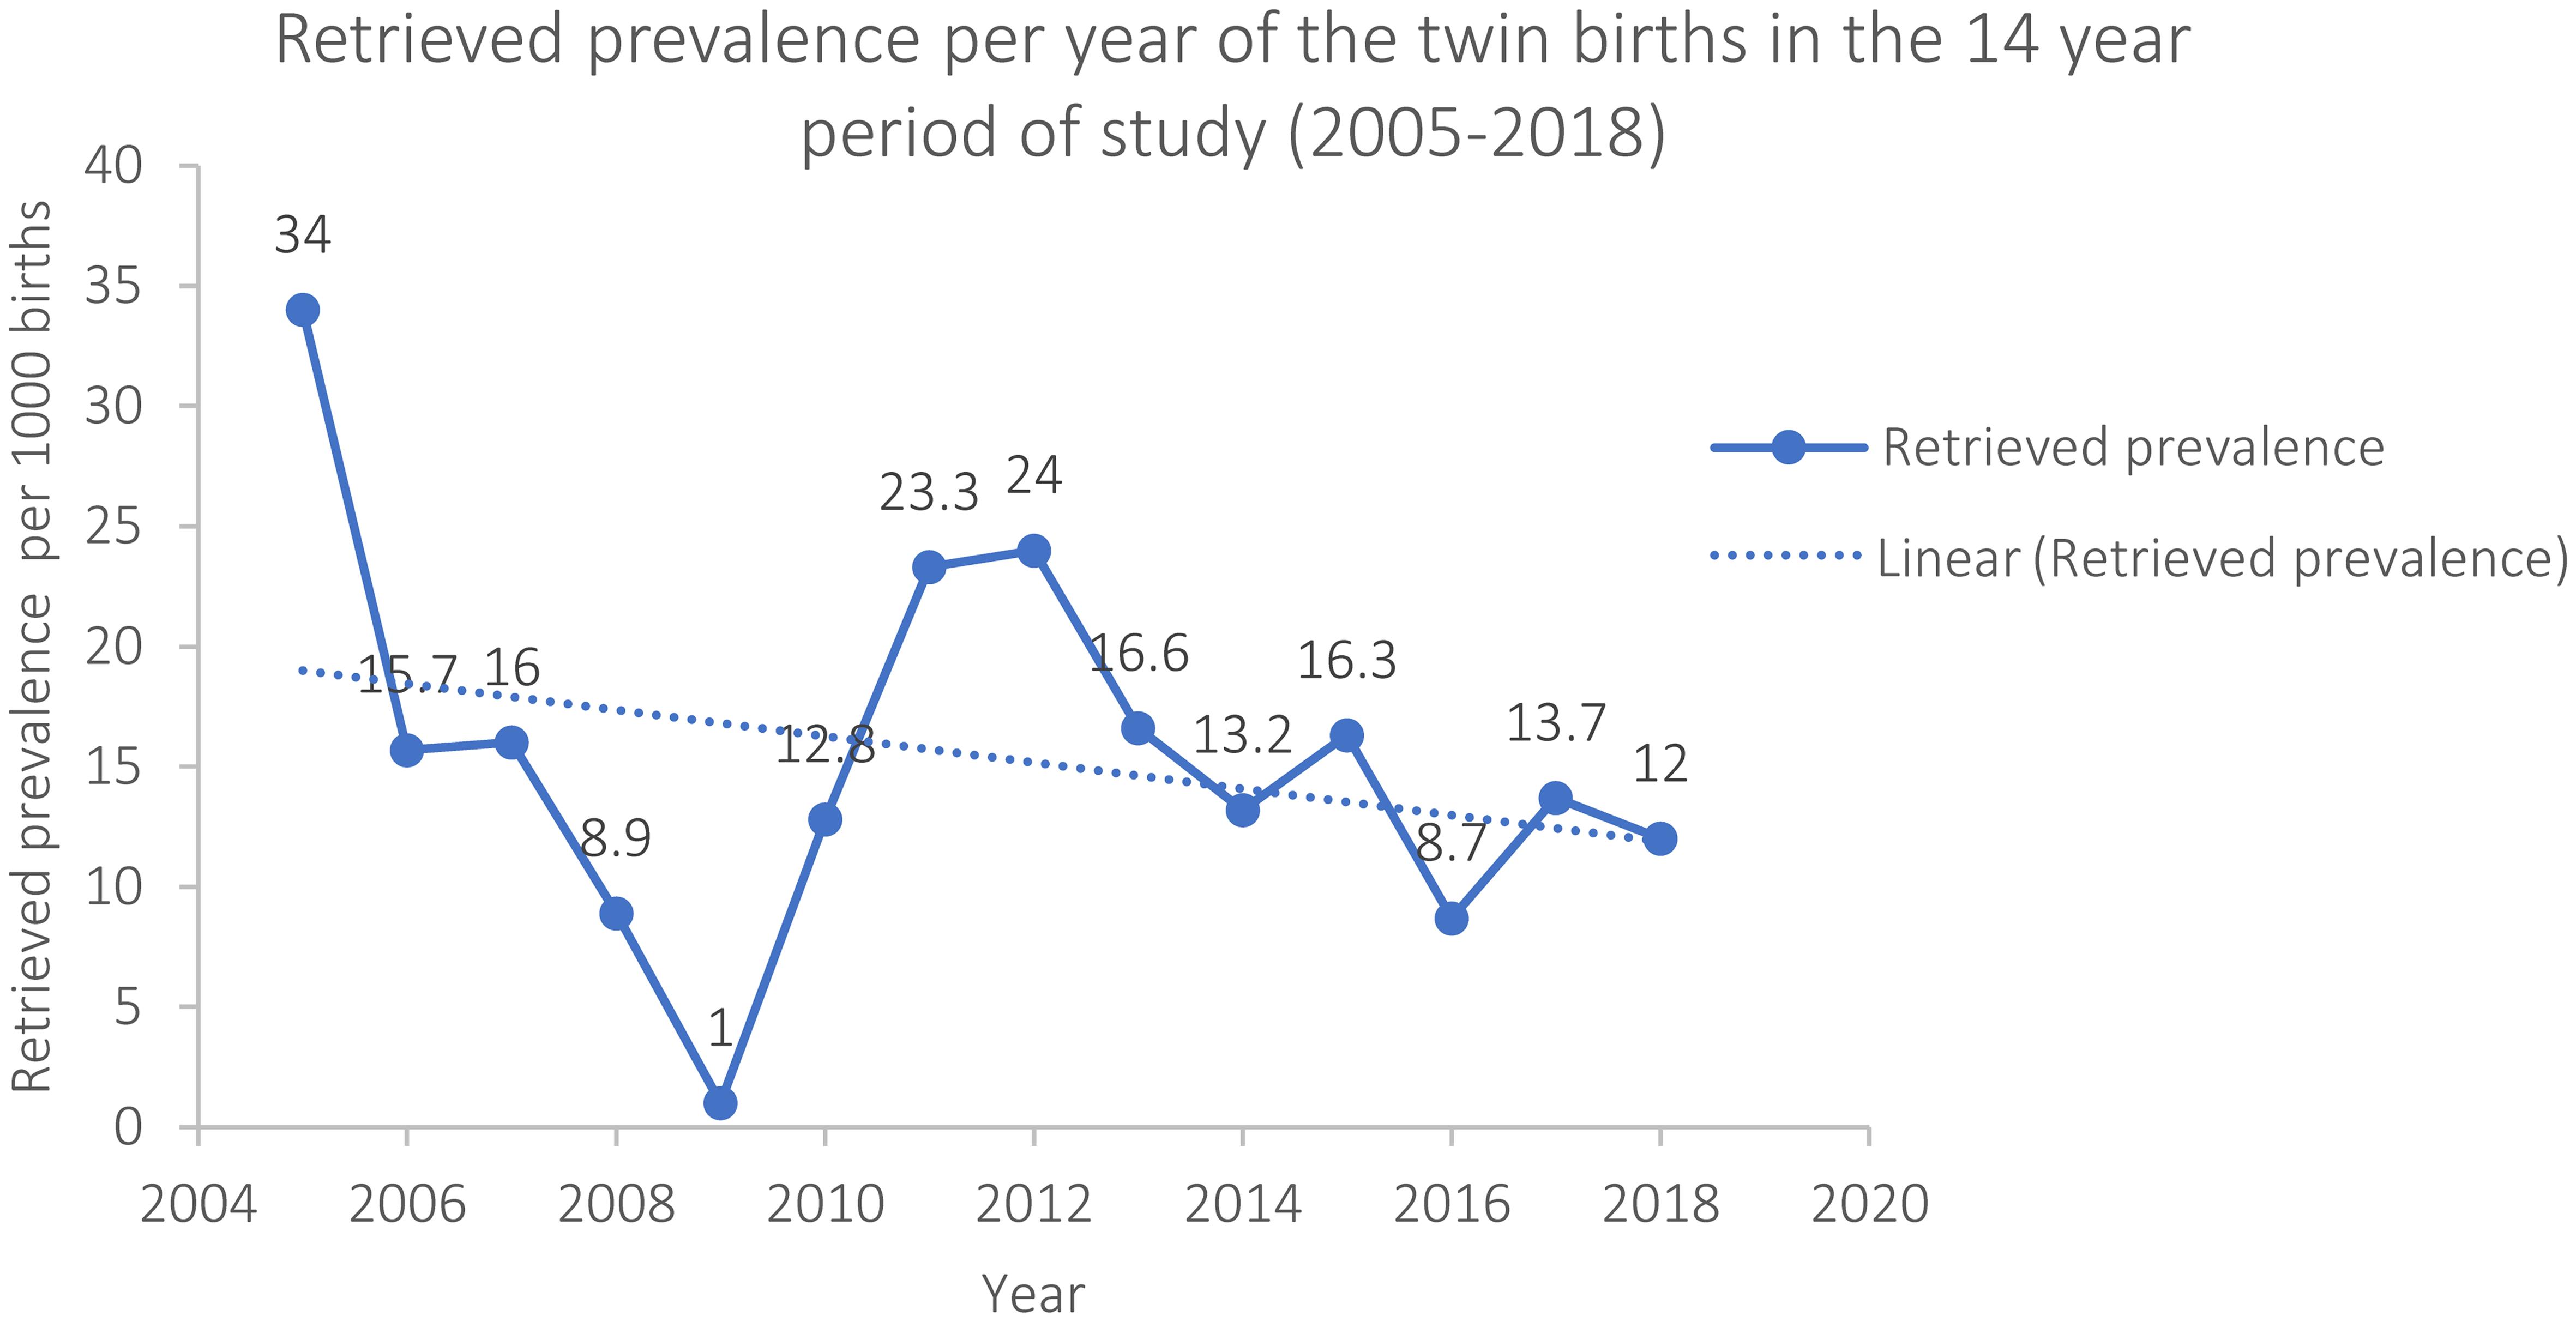 Trend of the retrieved prevalence of twin births over the 14 years (2005–2018).